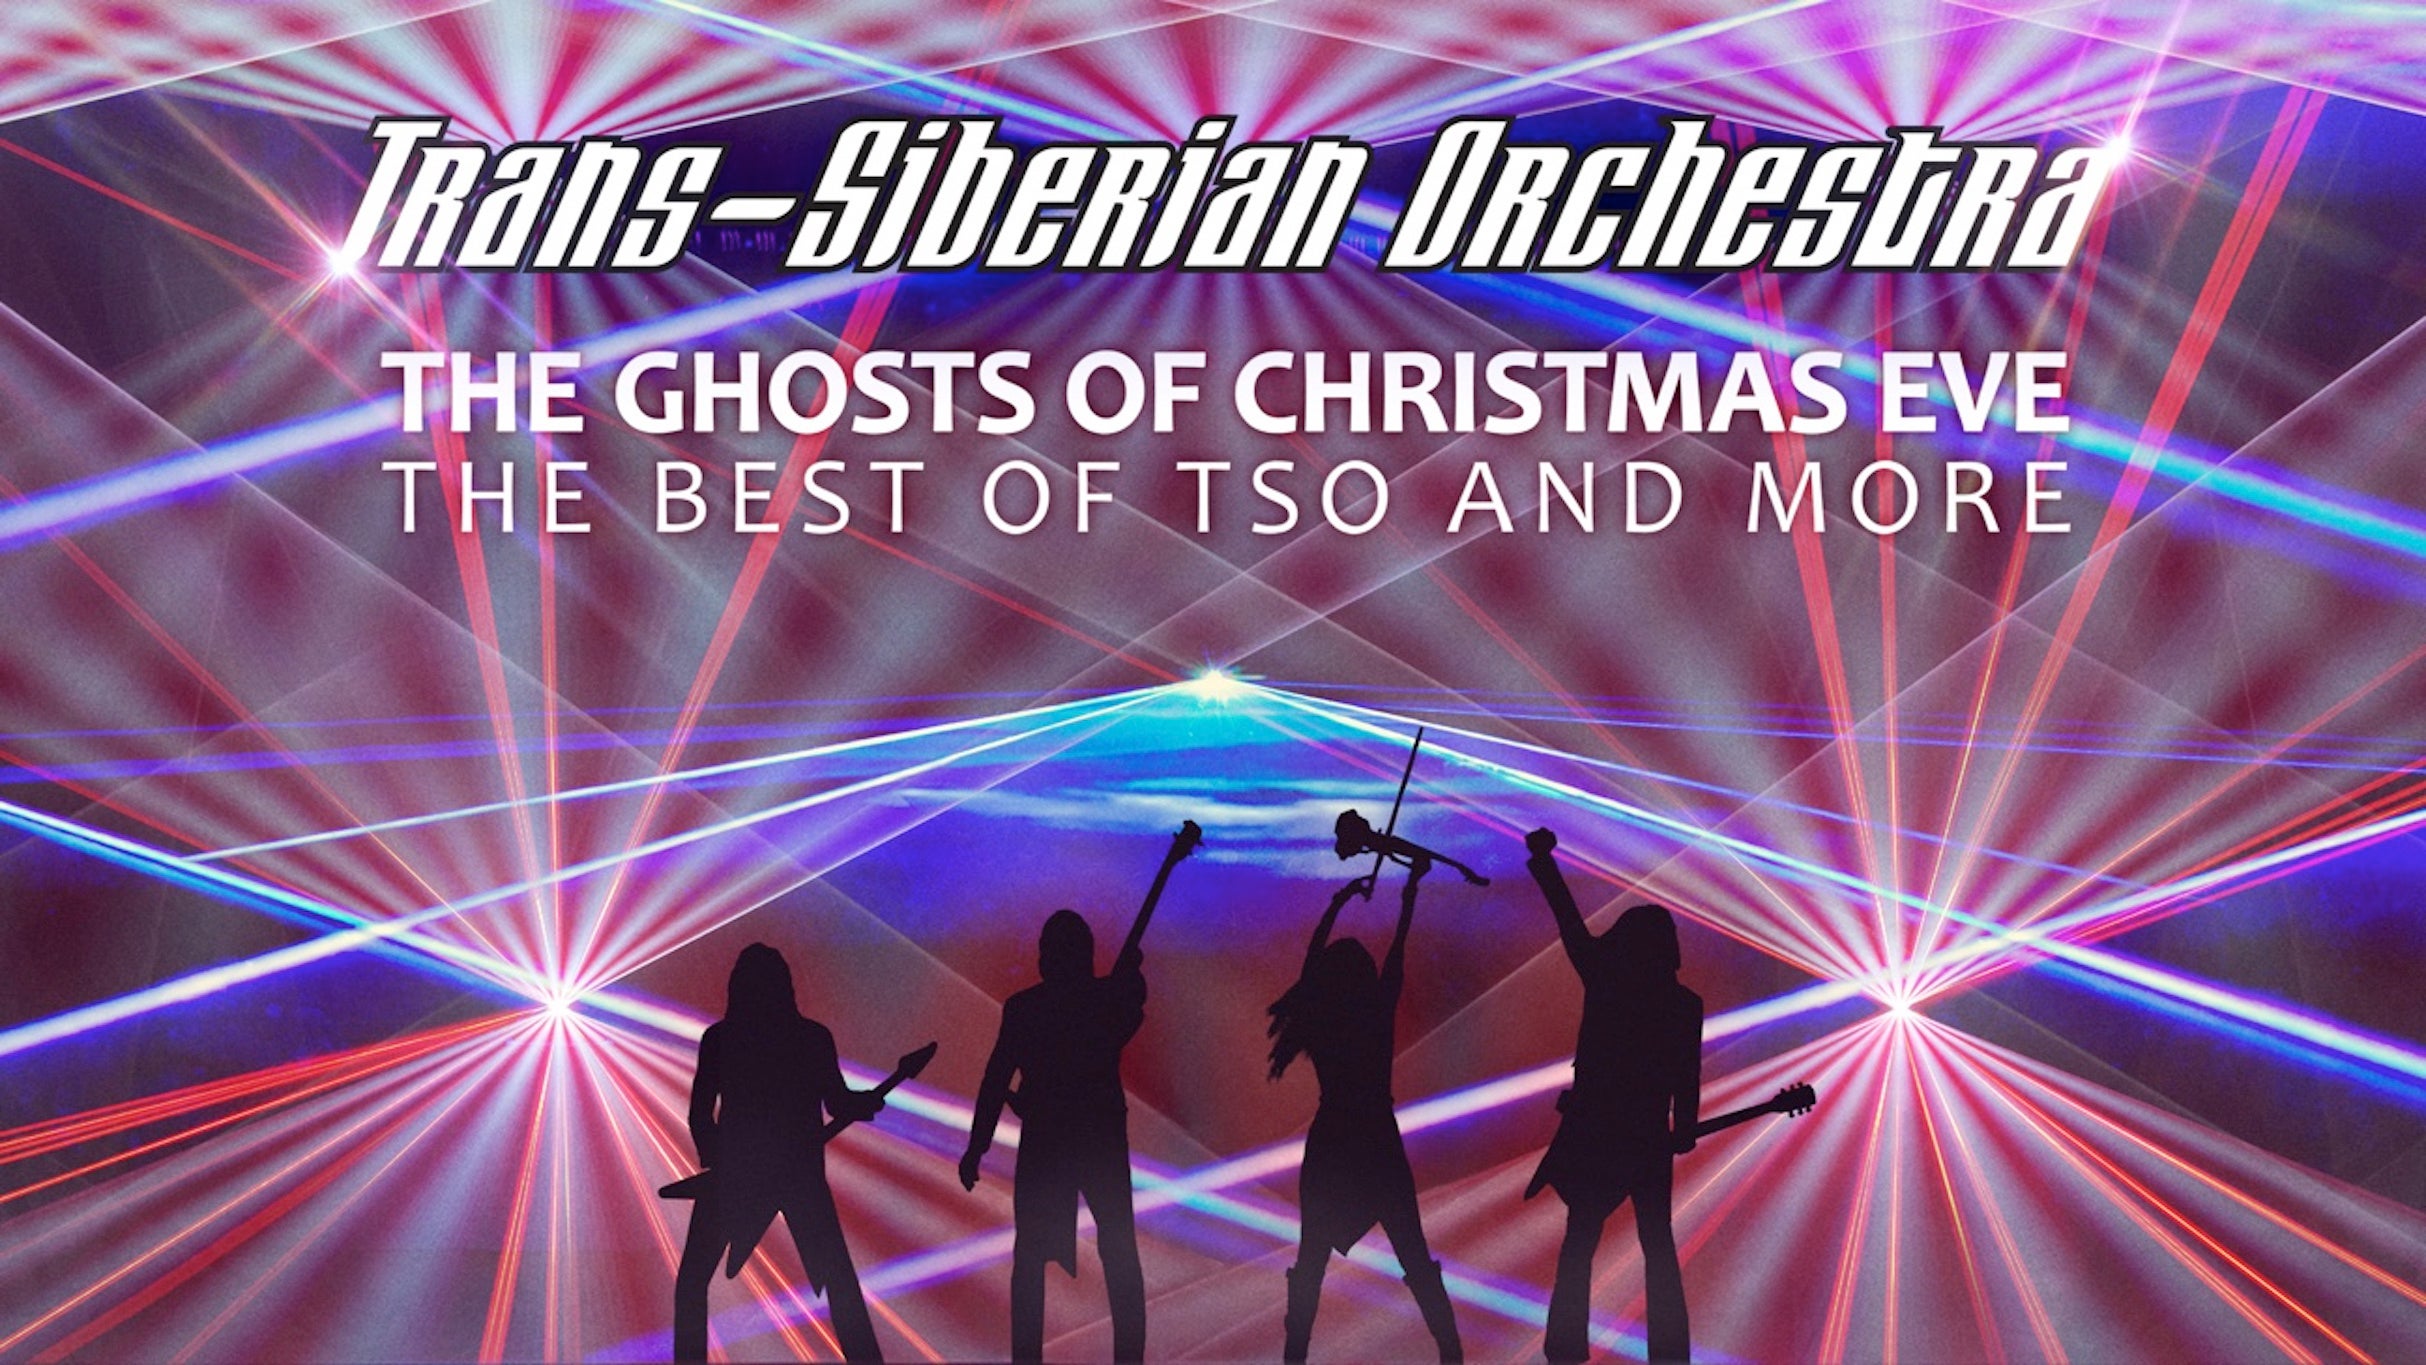 Trans-Siberian Orchestra - The Ghosts Of Christmas Eve presale password for advance tickets in Council Bluffs